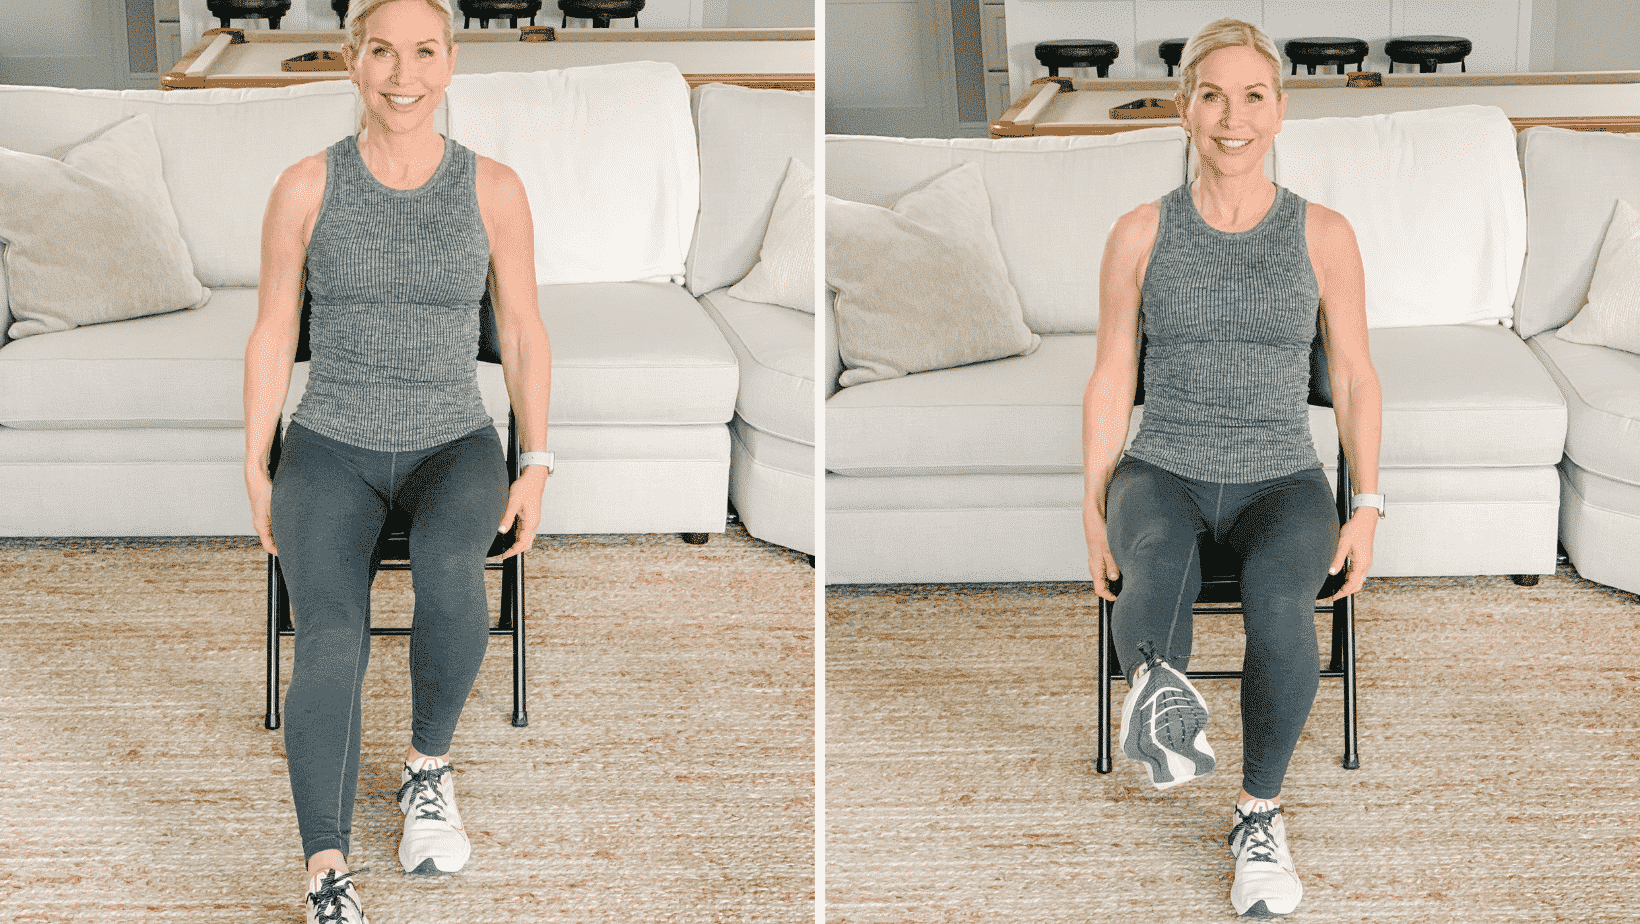 Chris Freytag demonstrating core exercises for older adults – seated leg lift